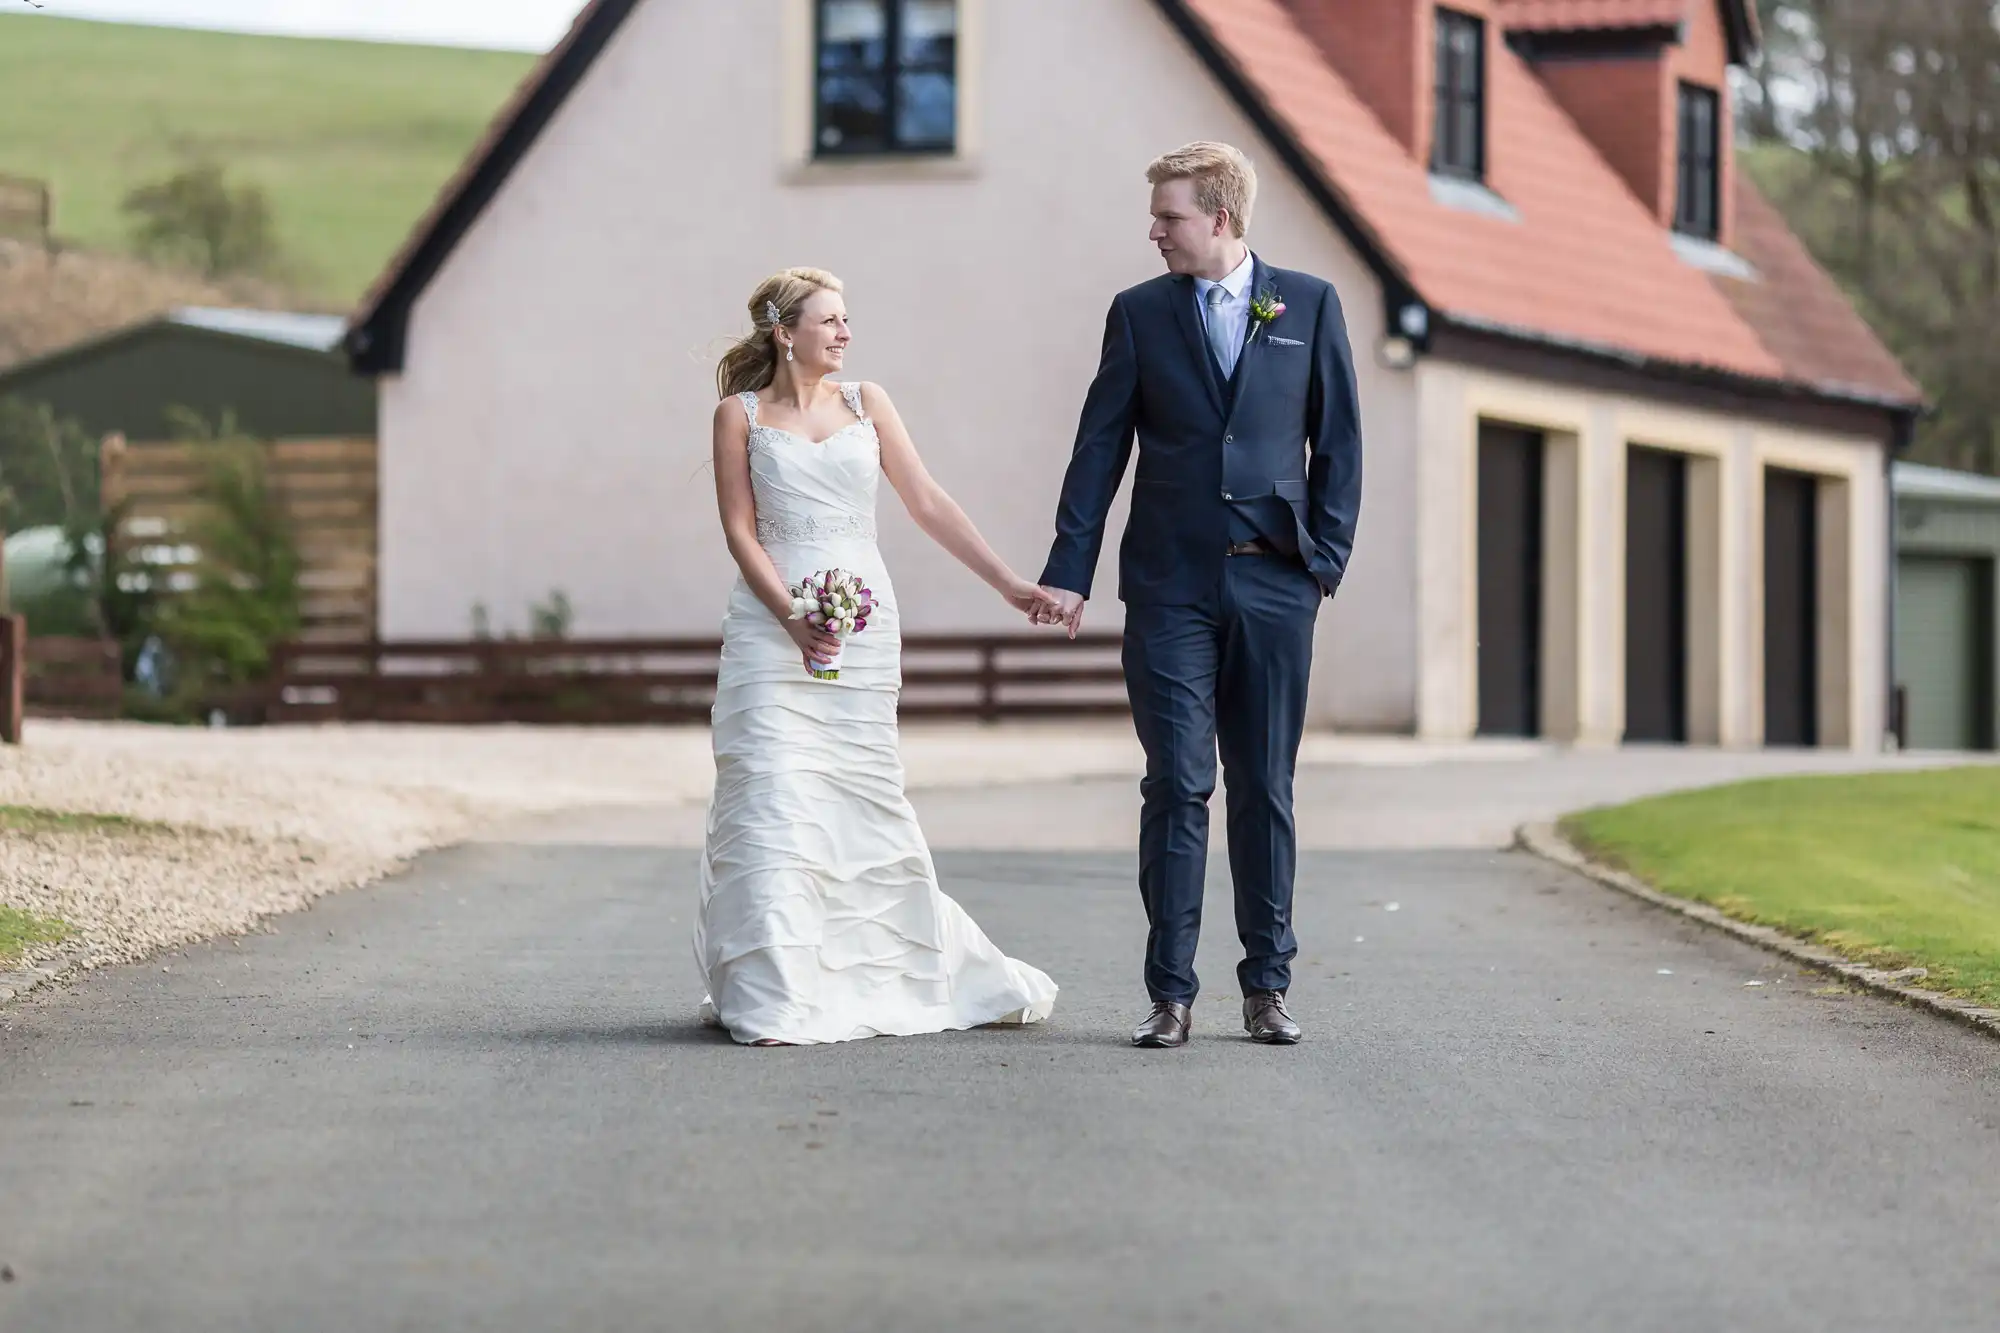 A bride and groom holding hands walk down a paved path, with a house and green hills in the background.